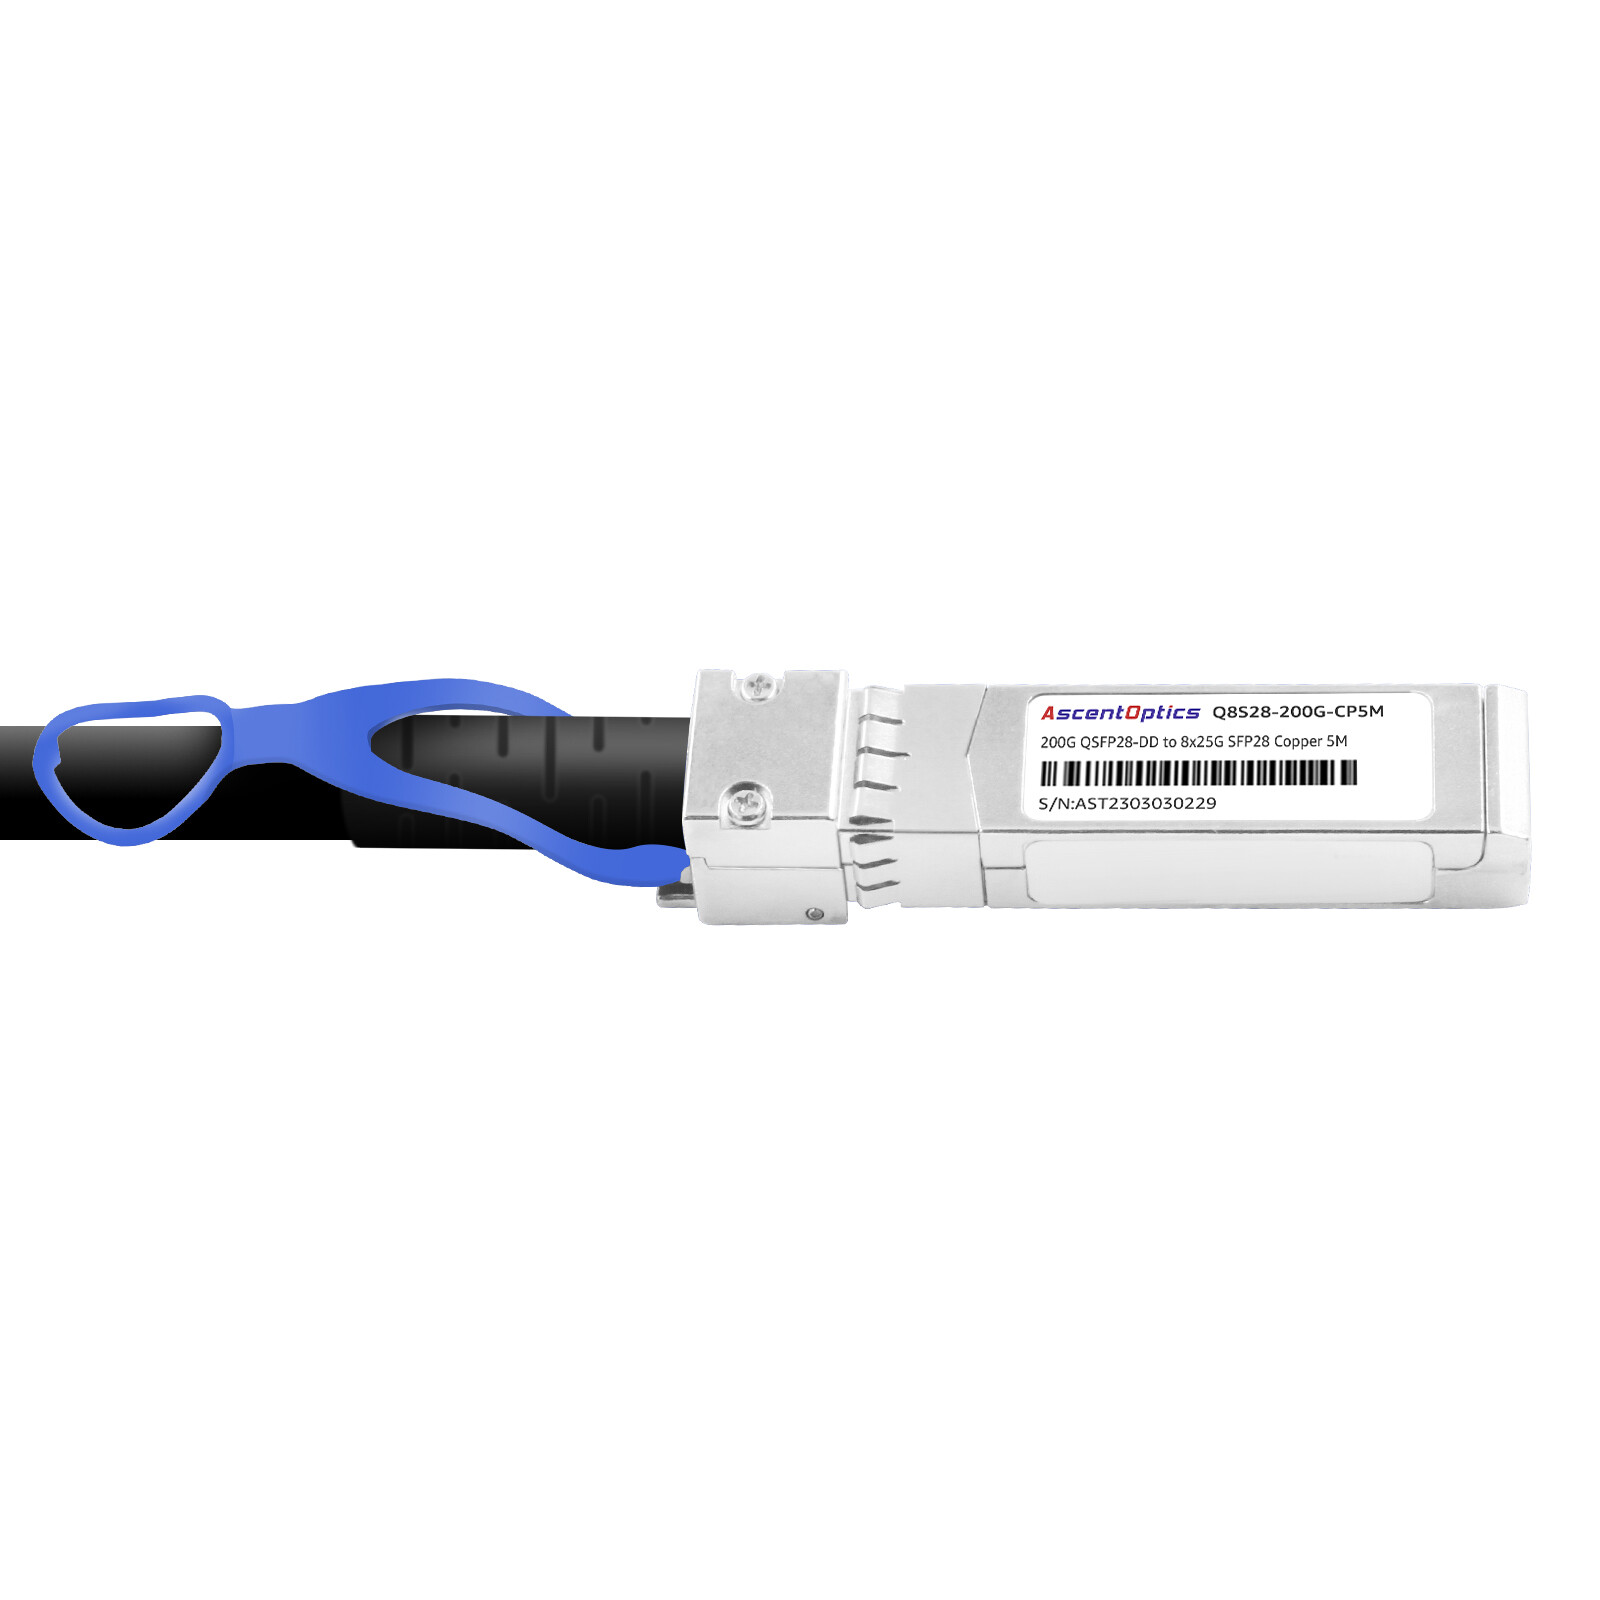 200G QSFP28-DD to 8x 25G SFP28 Copper Breakout Cable,5 Meters,Passive